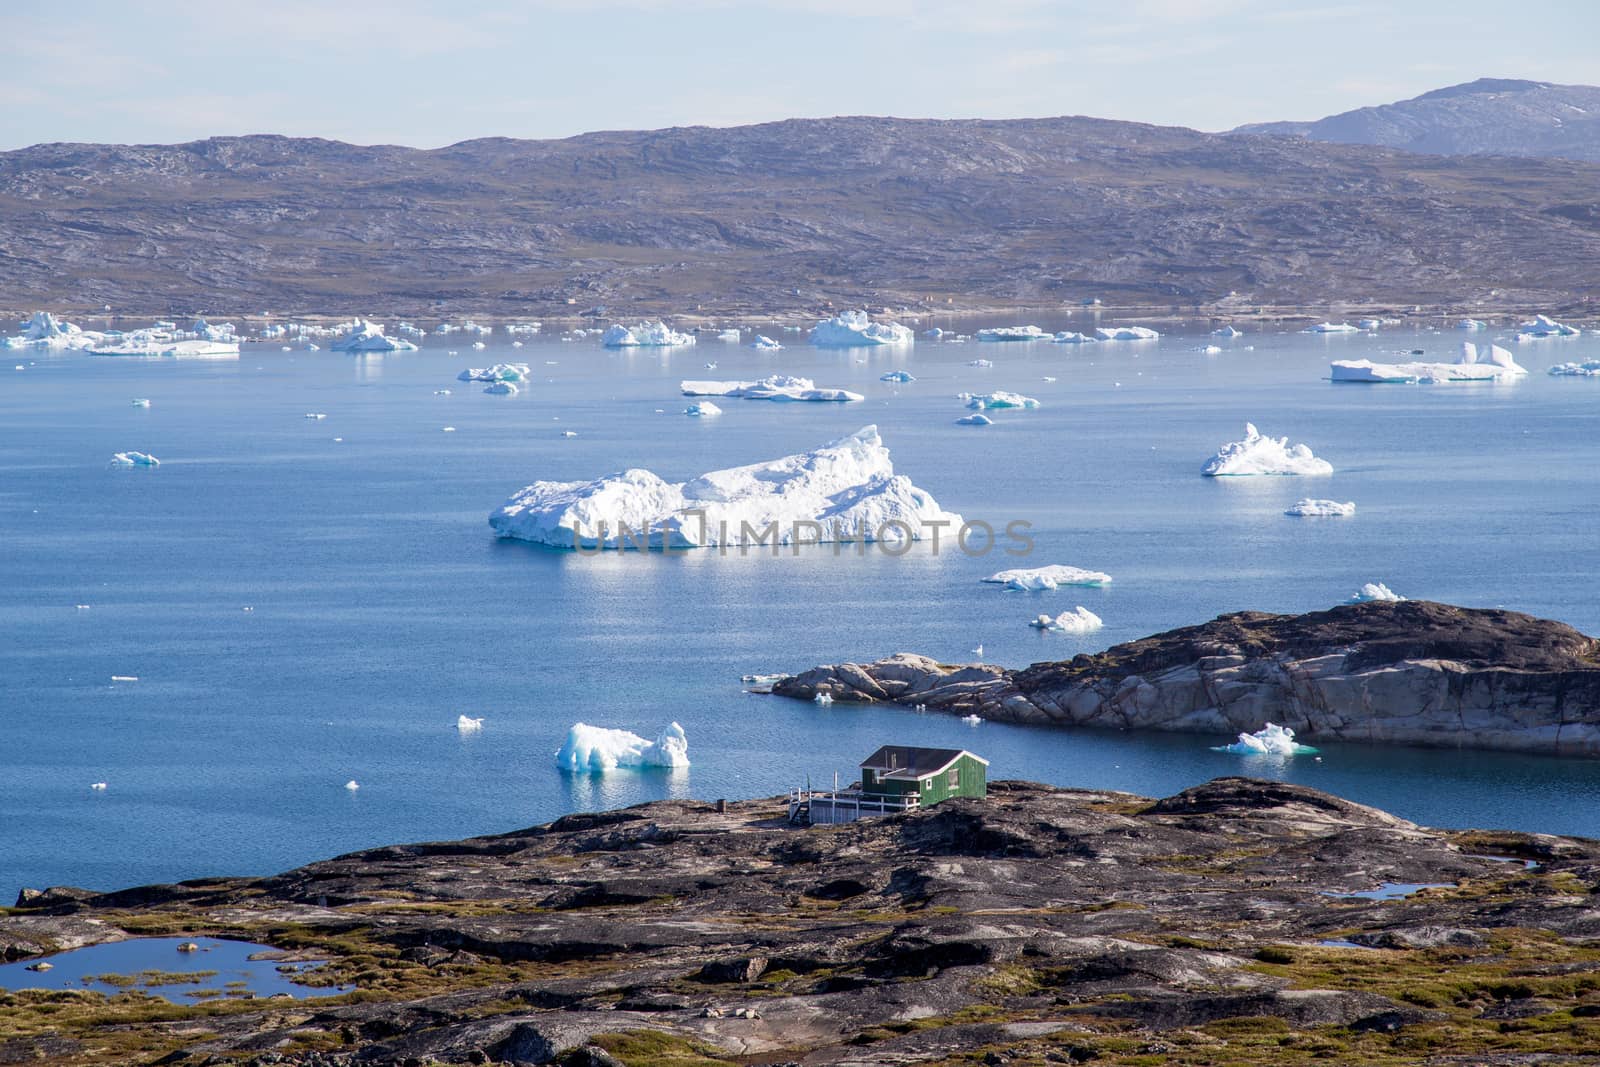 Ilulissat, Greenland - July 08, 2018: A green wooden house at the coast with icebergs in the background.